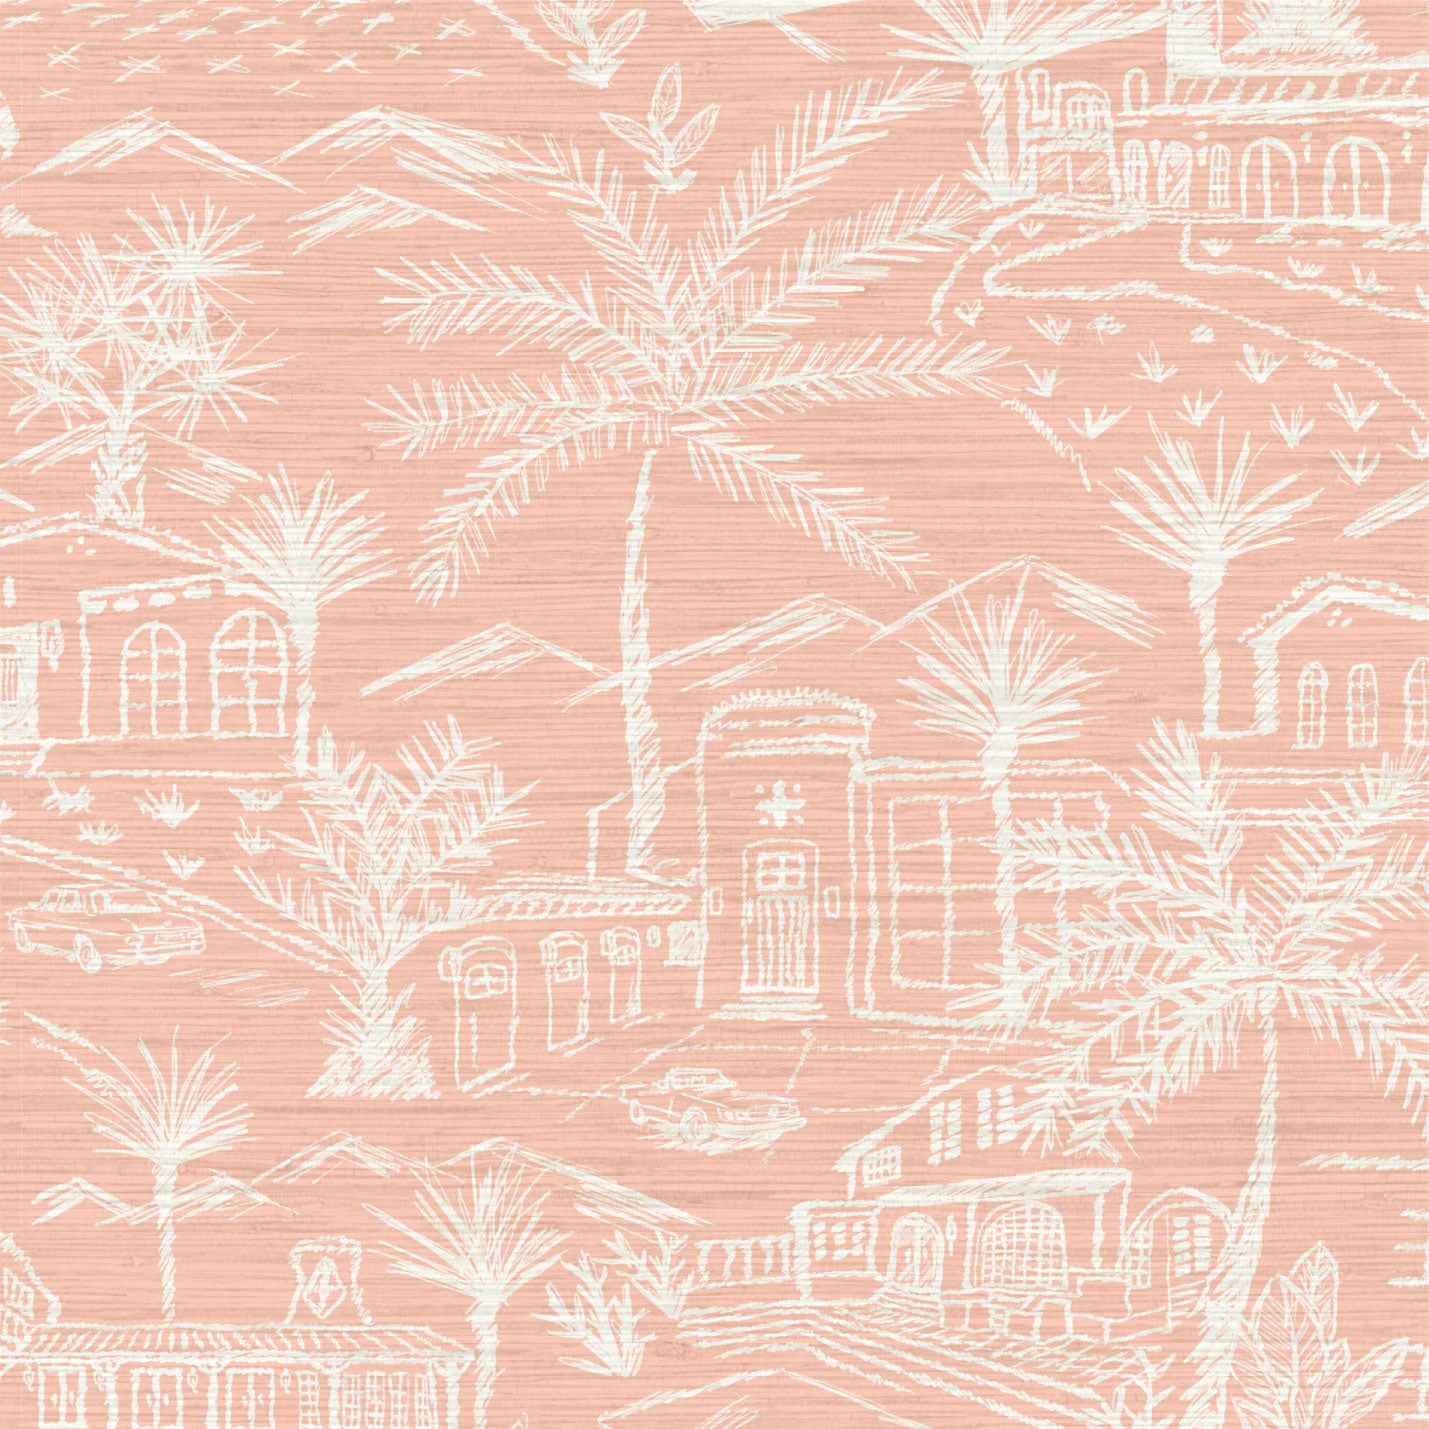 Grasscloth wallpaper Natural Textured Eco-Friendly Non-toxic High-quality Sustainable Interior Design Bold Custom Tailor-made Retro chic Bold tropical garden palm tree vintage coastal toile Grasscloth wallpaper Natural Textured Eco-Friendly Non-toxic High-quality Sustainable Interior Design Bold Custom Tailor-made Retro chic Bold Toile de Jouy baby pink light pale nursery girl room off-white white